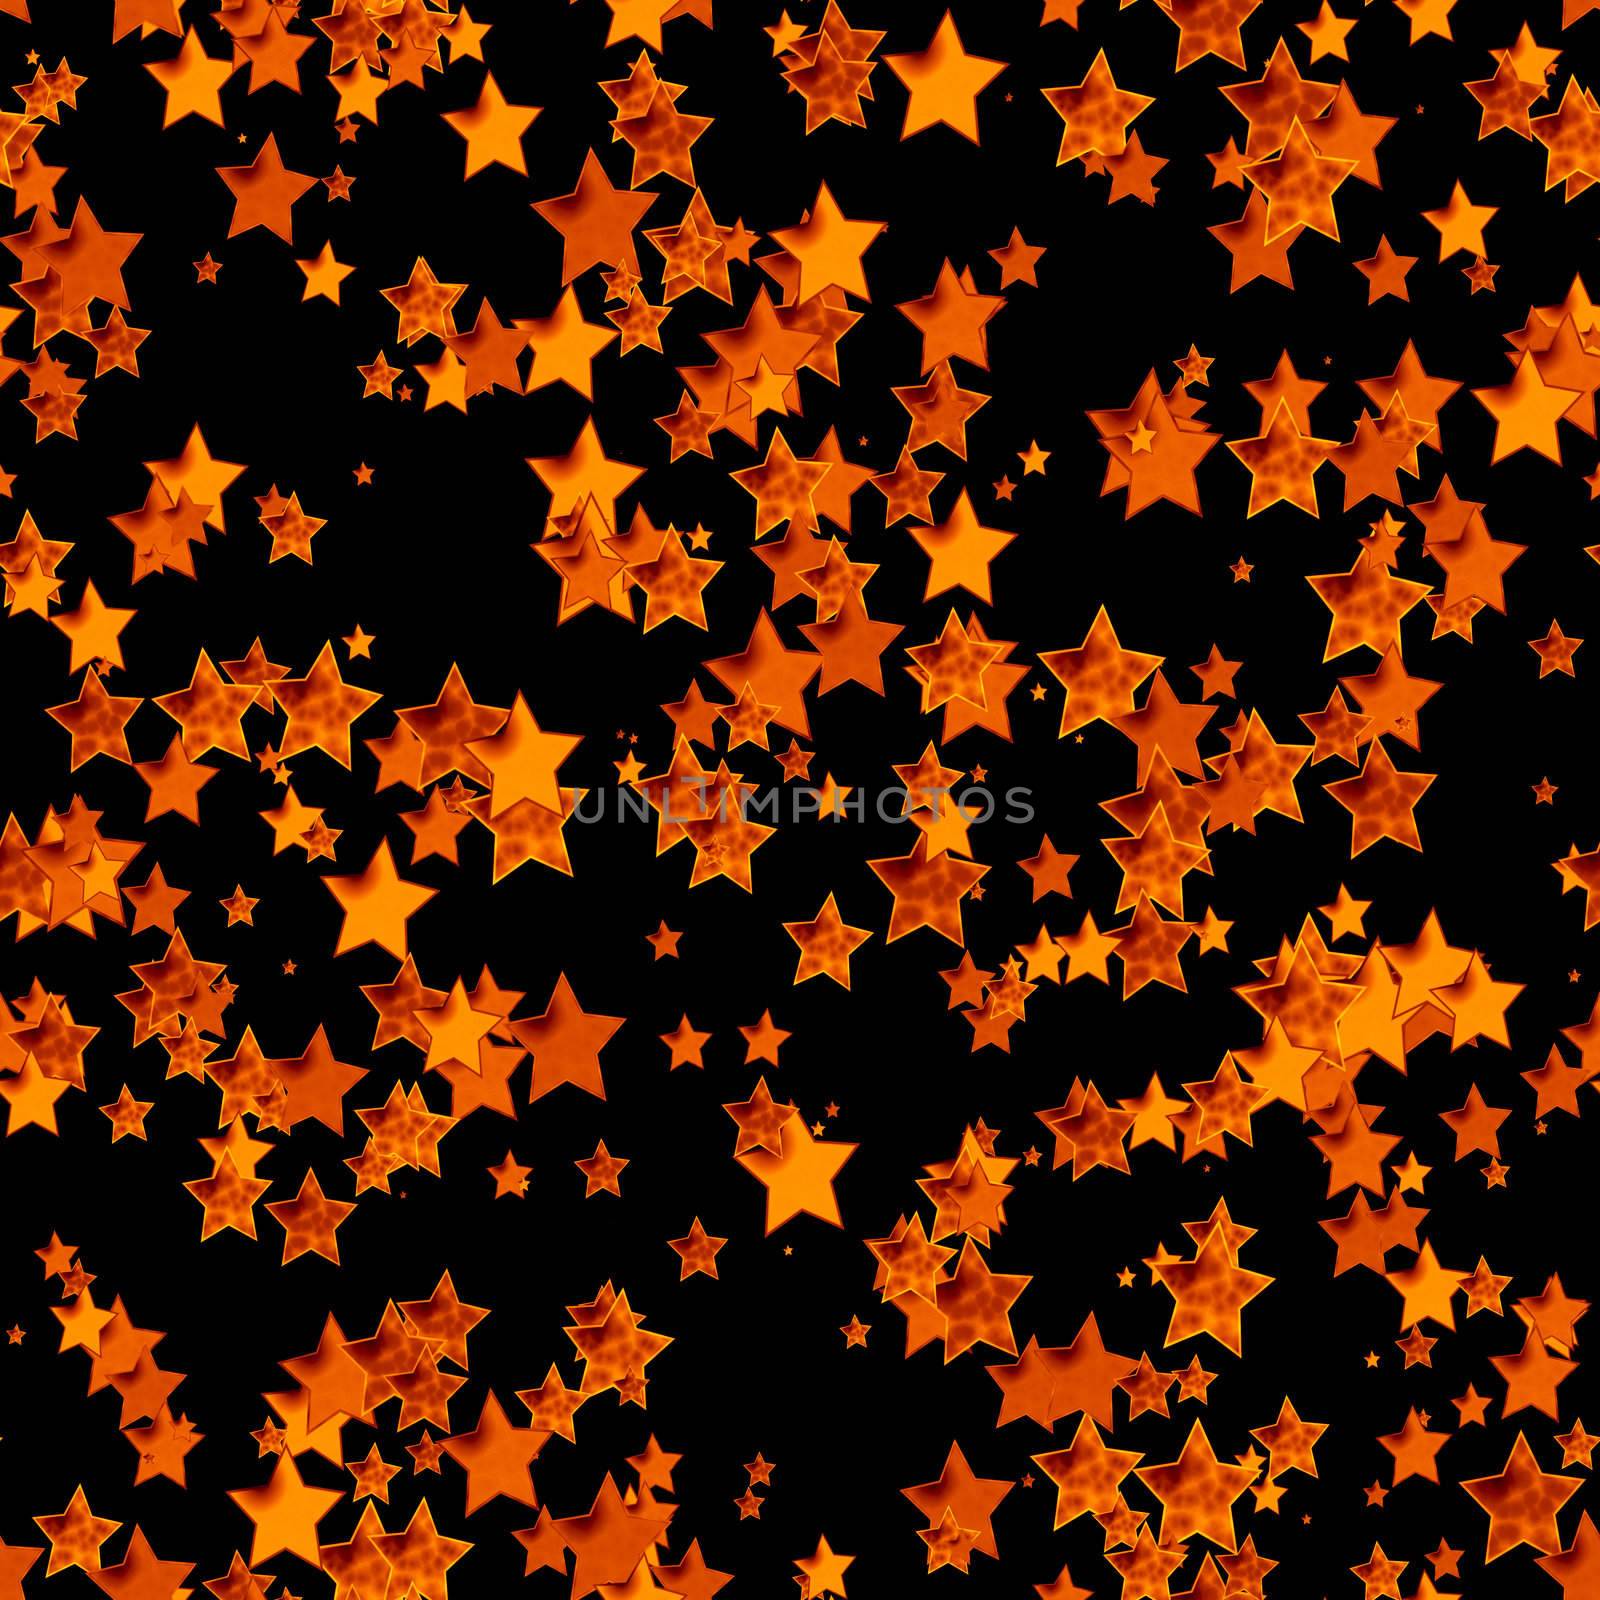 An illustration of a seamless stars background texture